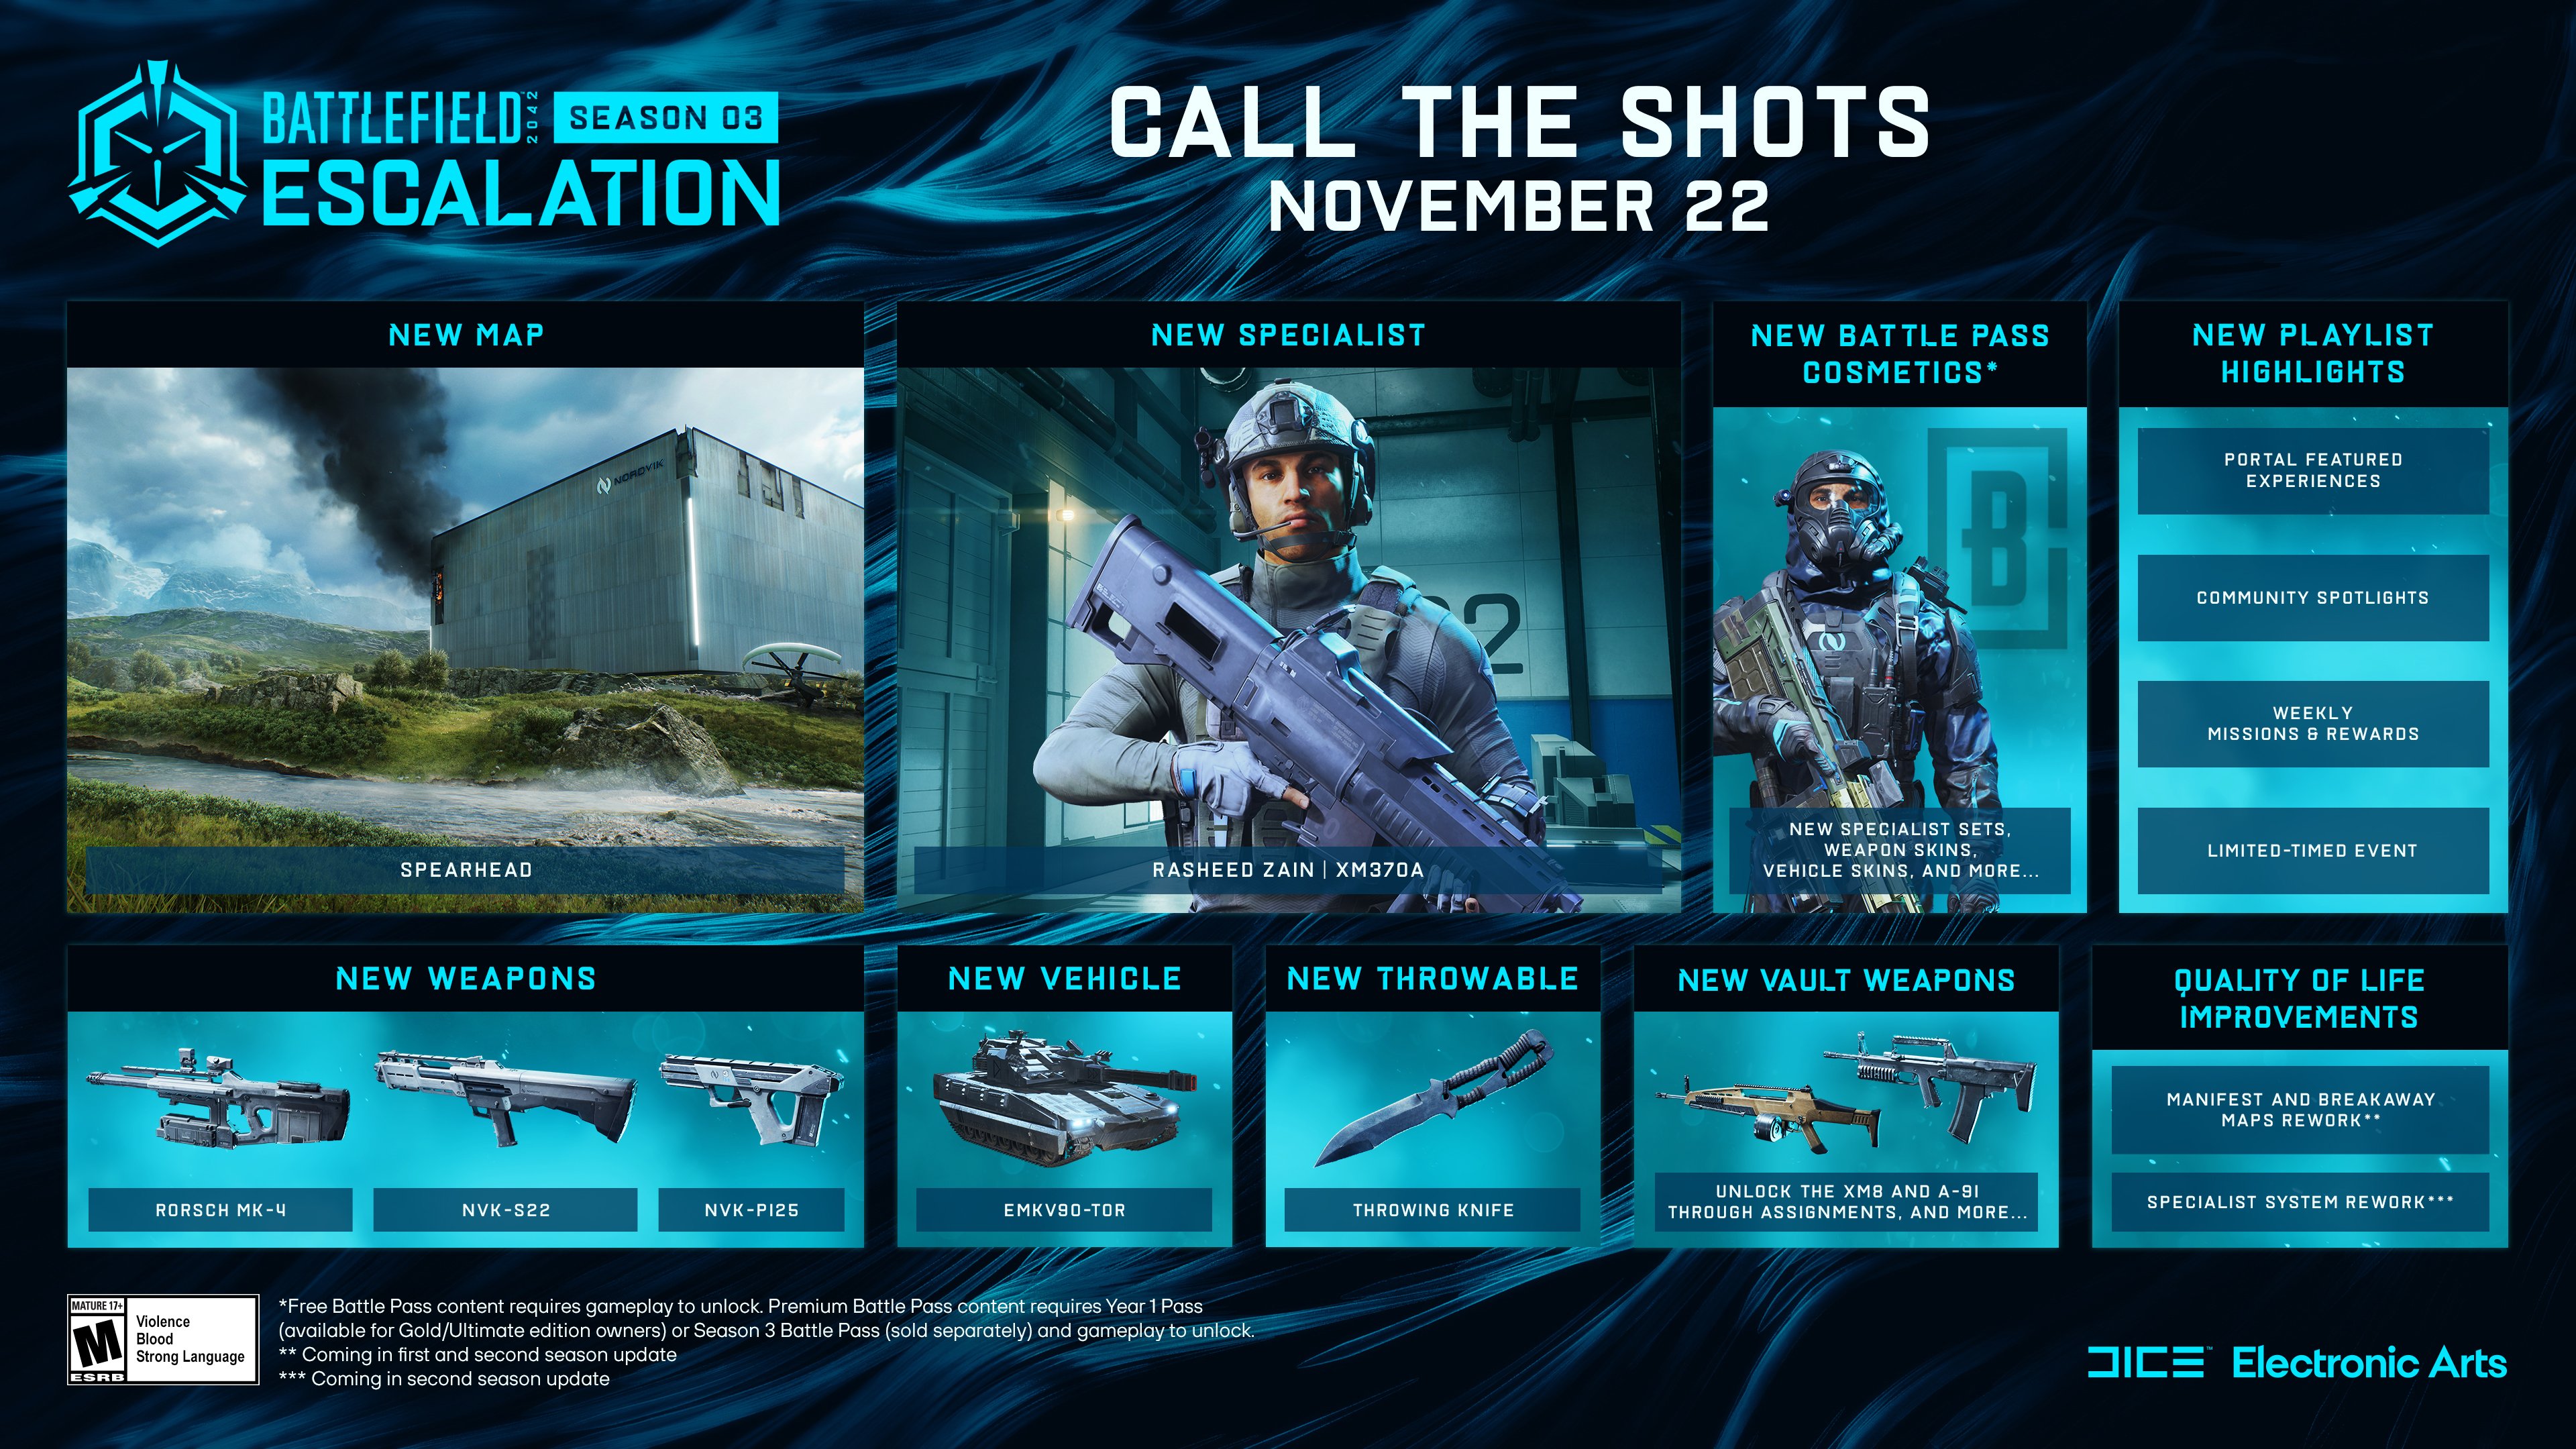 Image shows the Beauty Shot for Season 3: Escalation, featuring a new location, Spearhead alongside a new Specialist - Rasheed Zain and many more items of interest as described in the tweet.